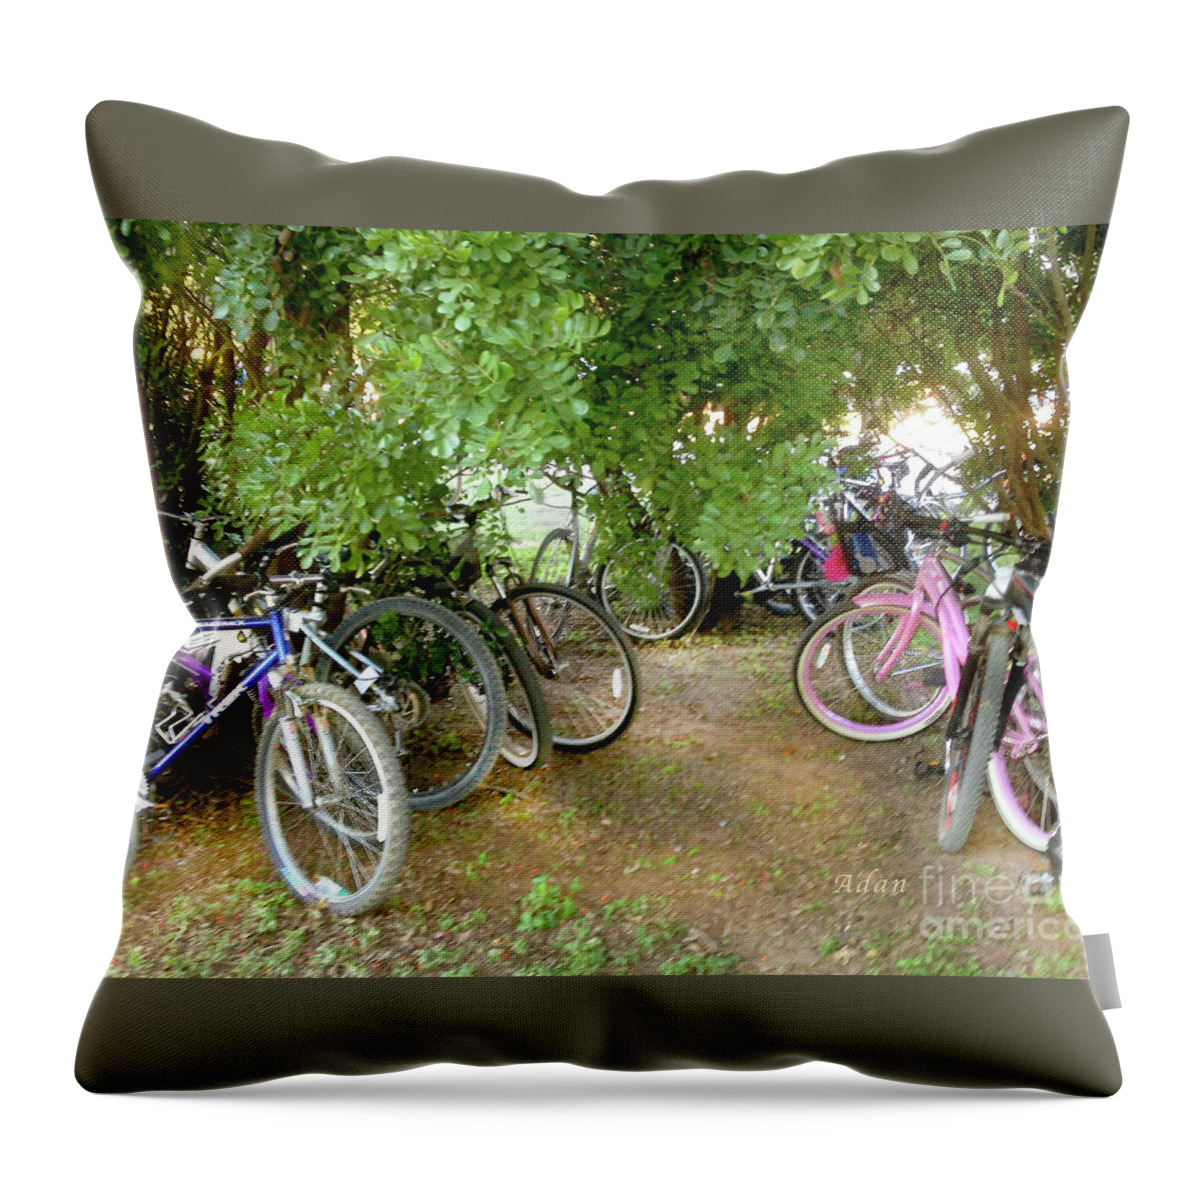 Zilker Park Throw Pillow featuring the photograph Austin Hike and Bike Trail - Zilker Park Bicycles - Easy Parking by Felipe Adan Lerma